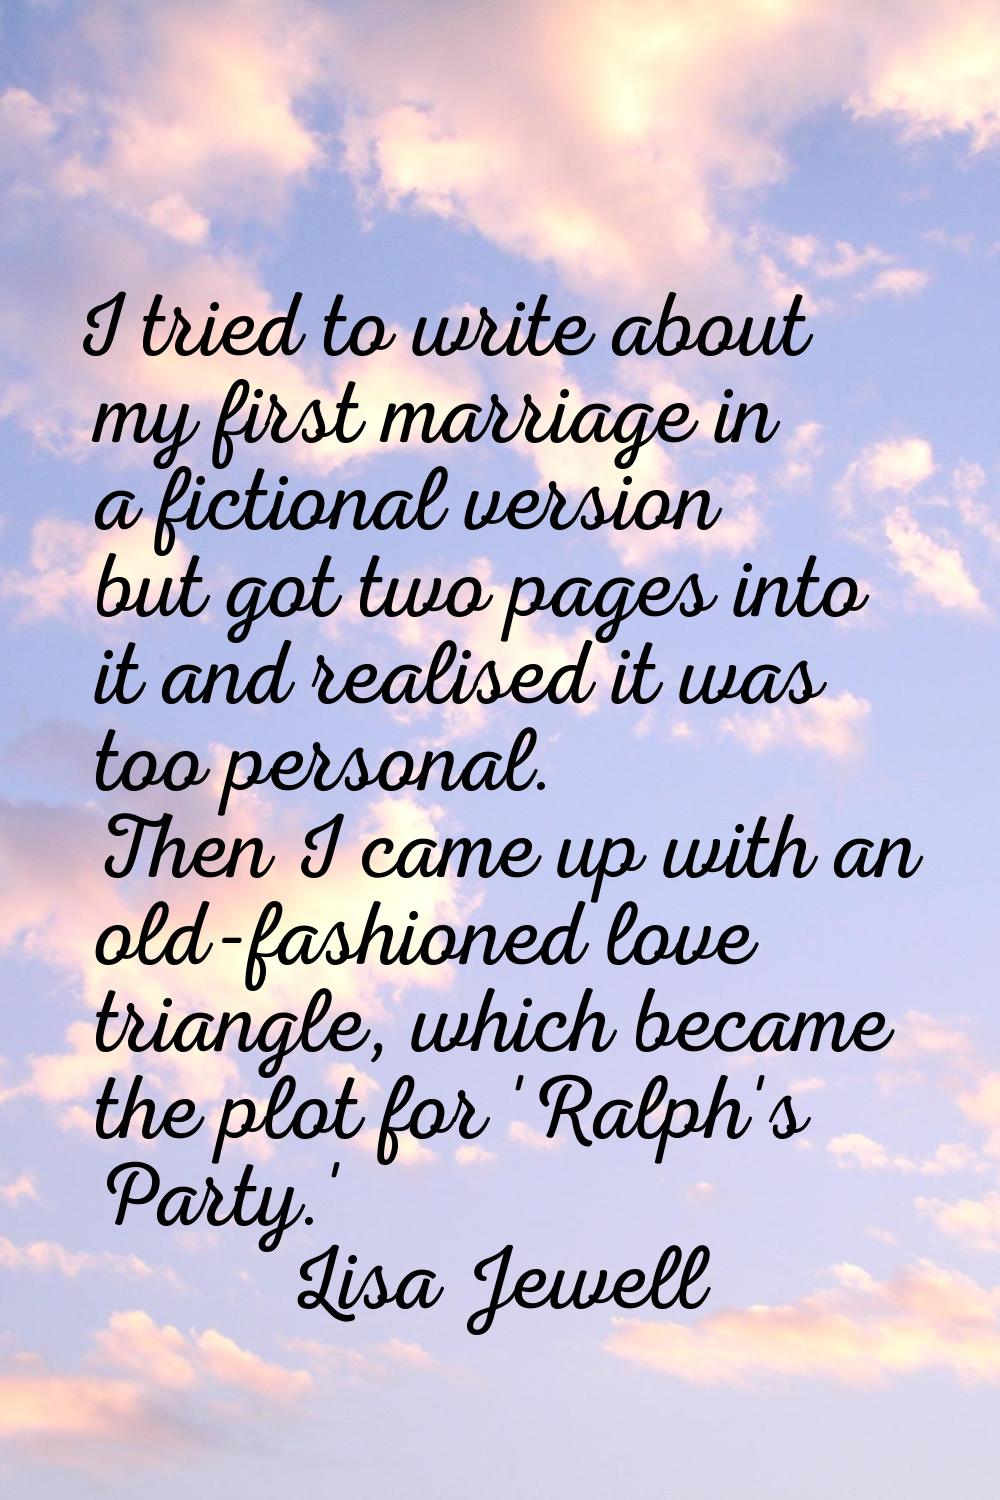 I tried to write about my first marriage in a fictional version but got two pages into it and reali